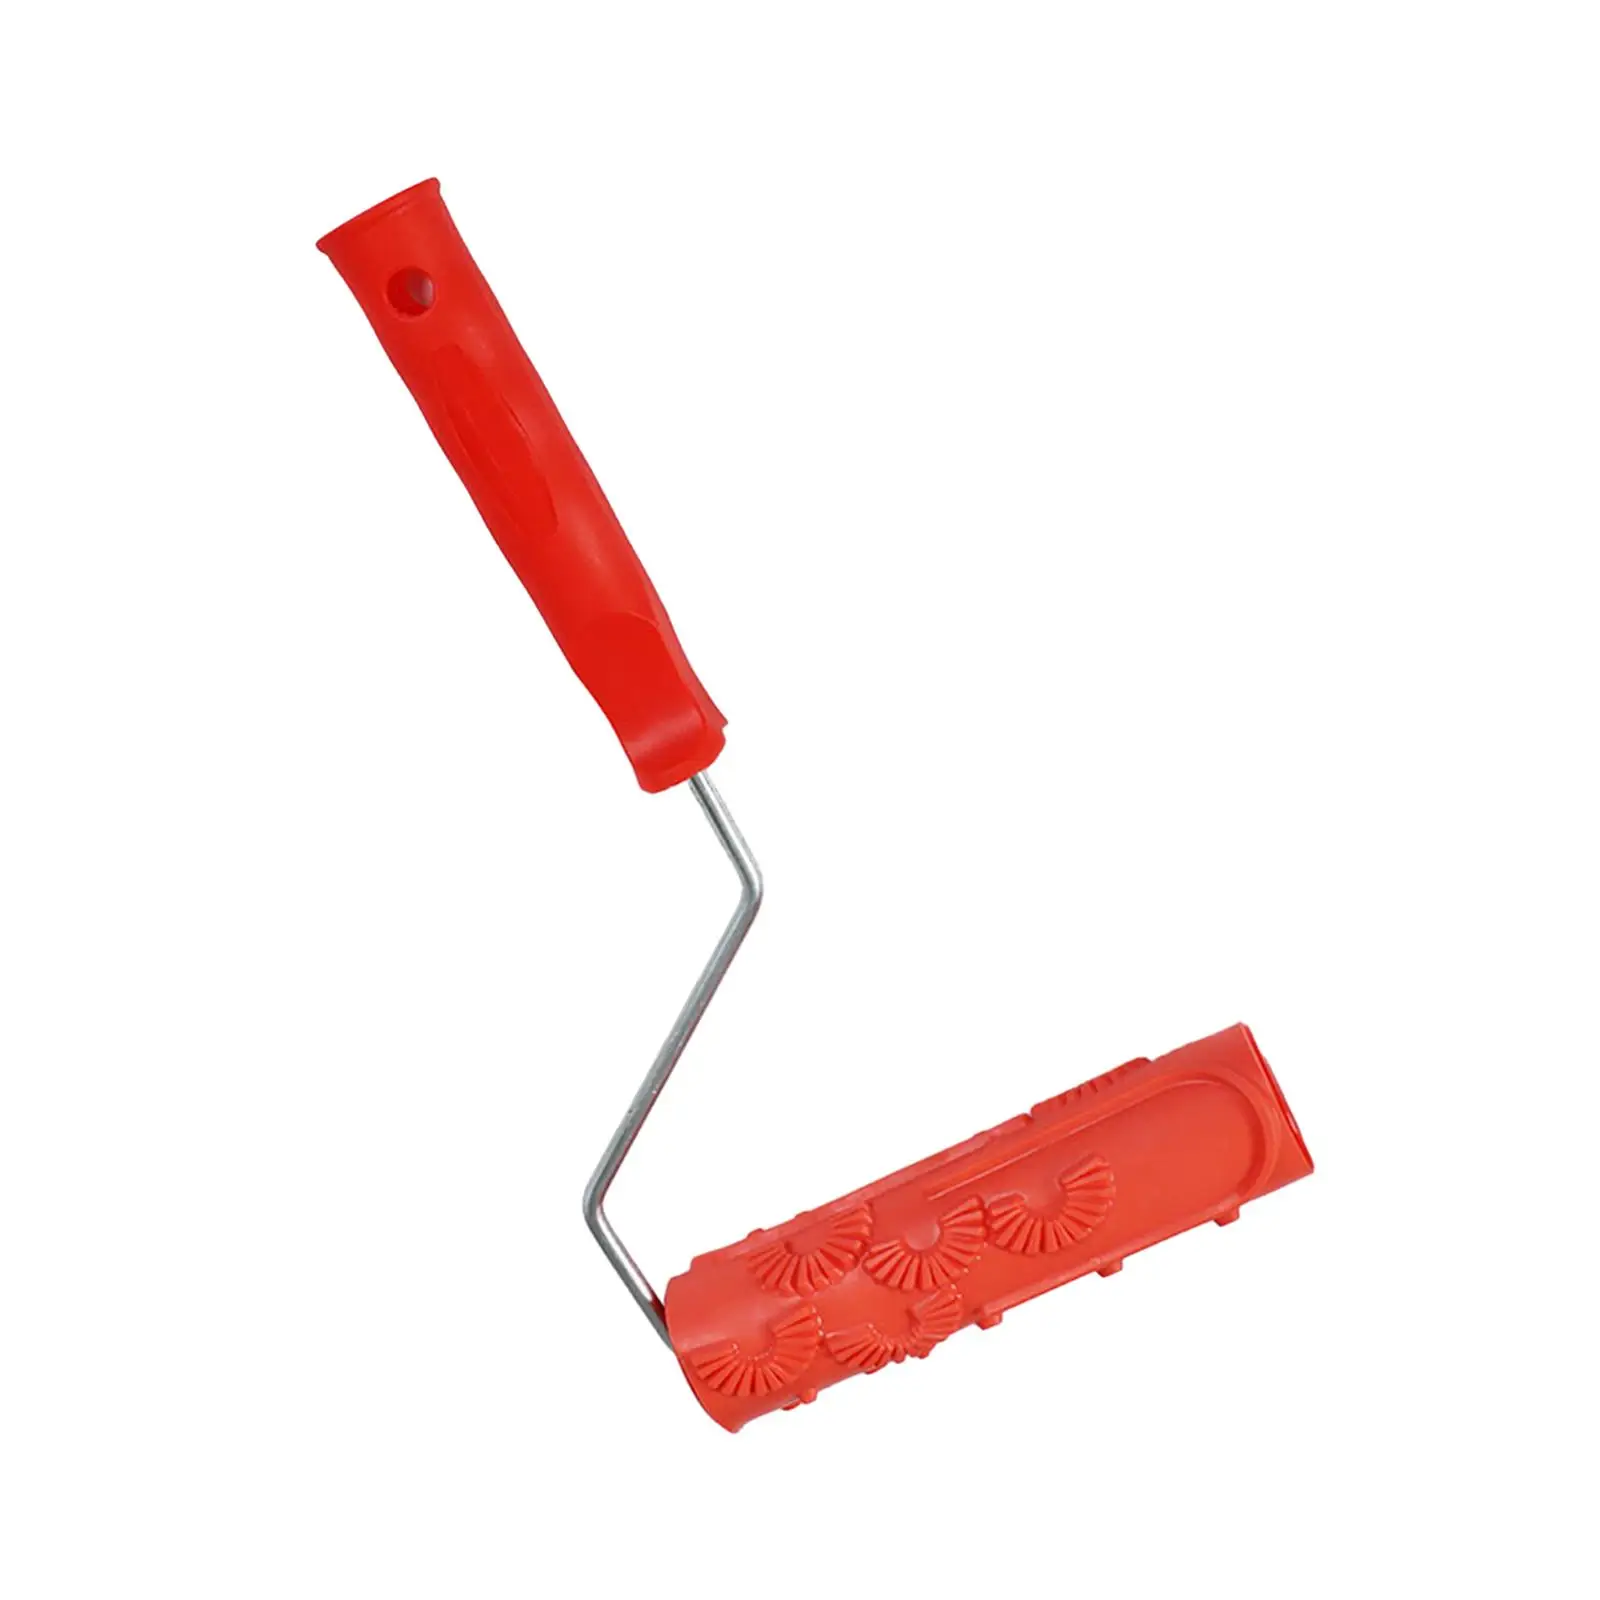 180mm Texture Rubber Paint Roller Brush Decorative Tool with PP Handle Smooth Rolling Accessory for Household Use Red Durable